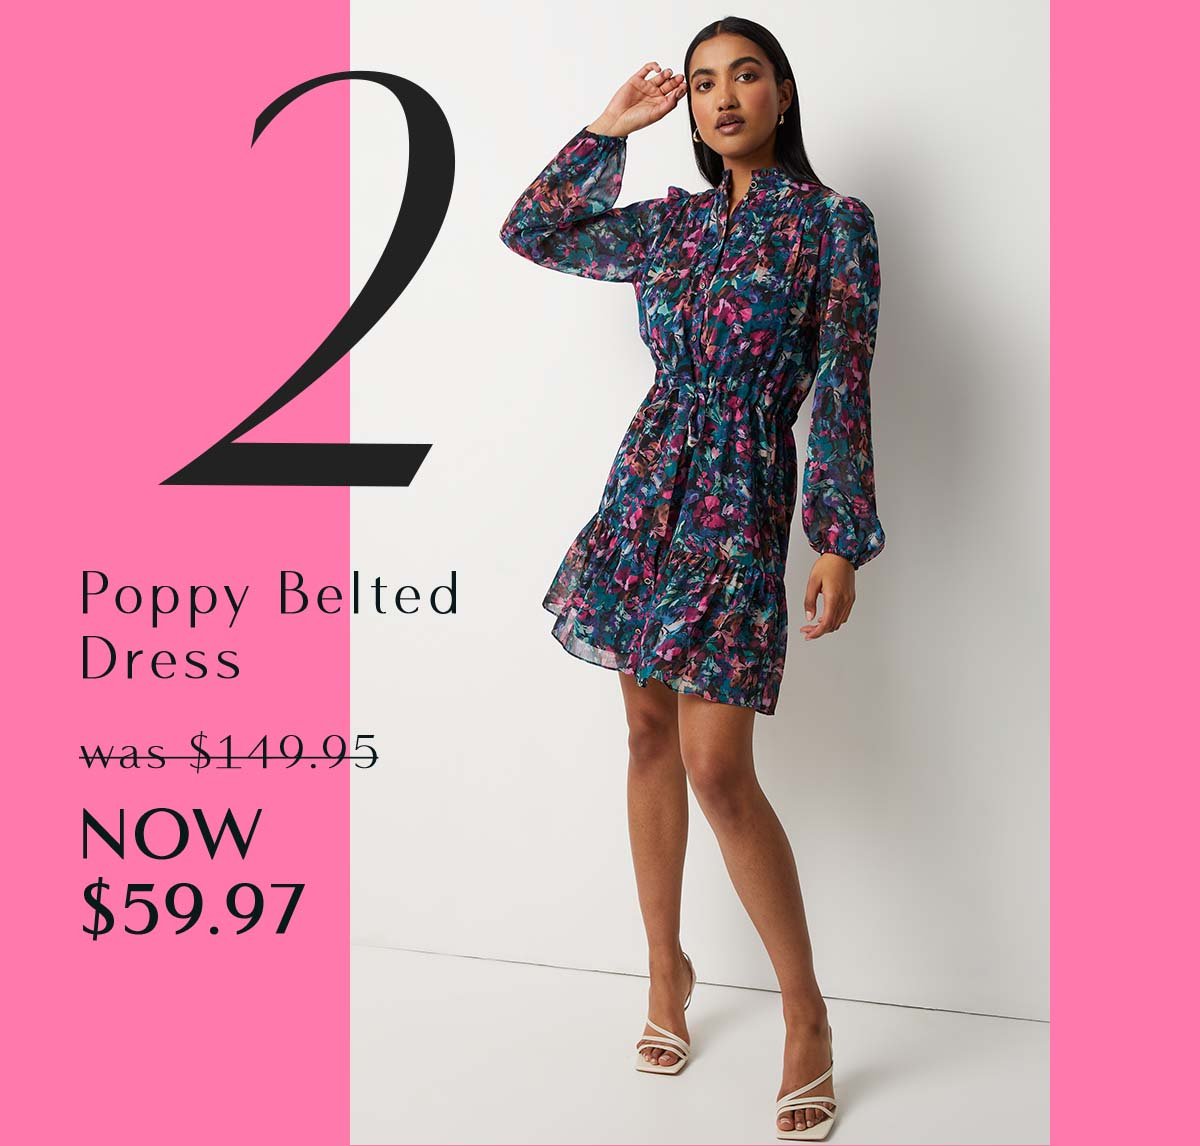 2.Poppy Belted Dress was $149.95 NOW $71.97